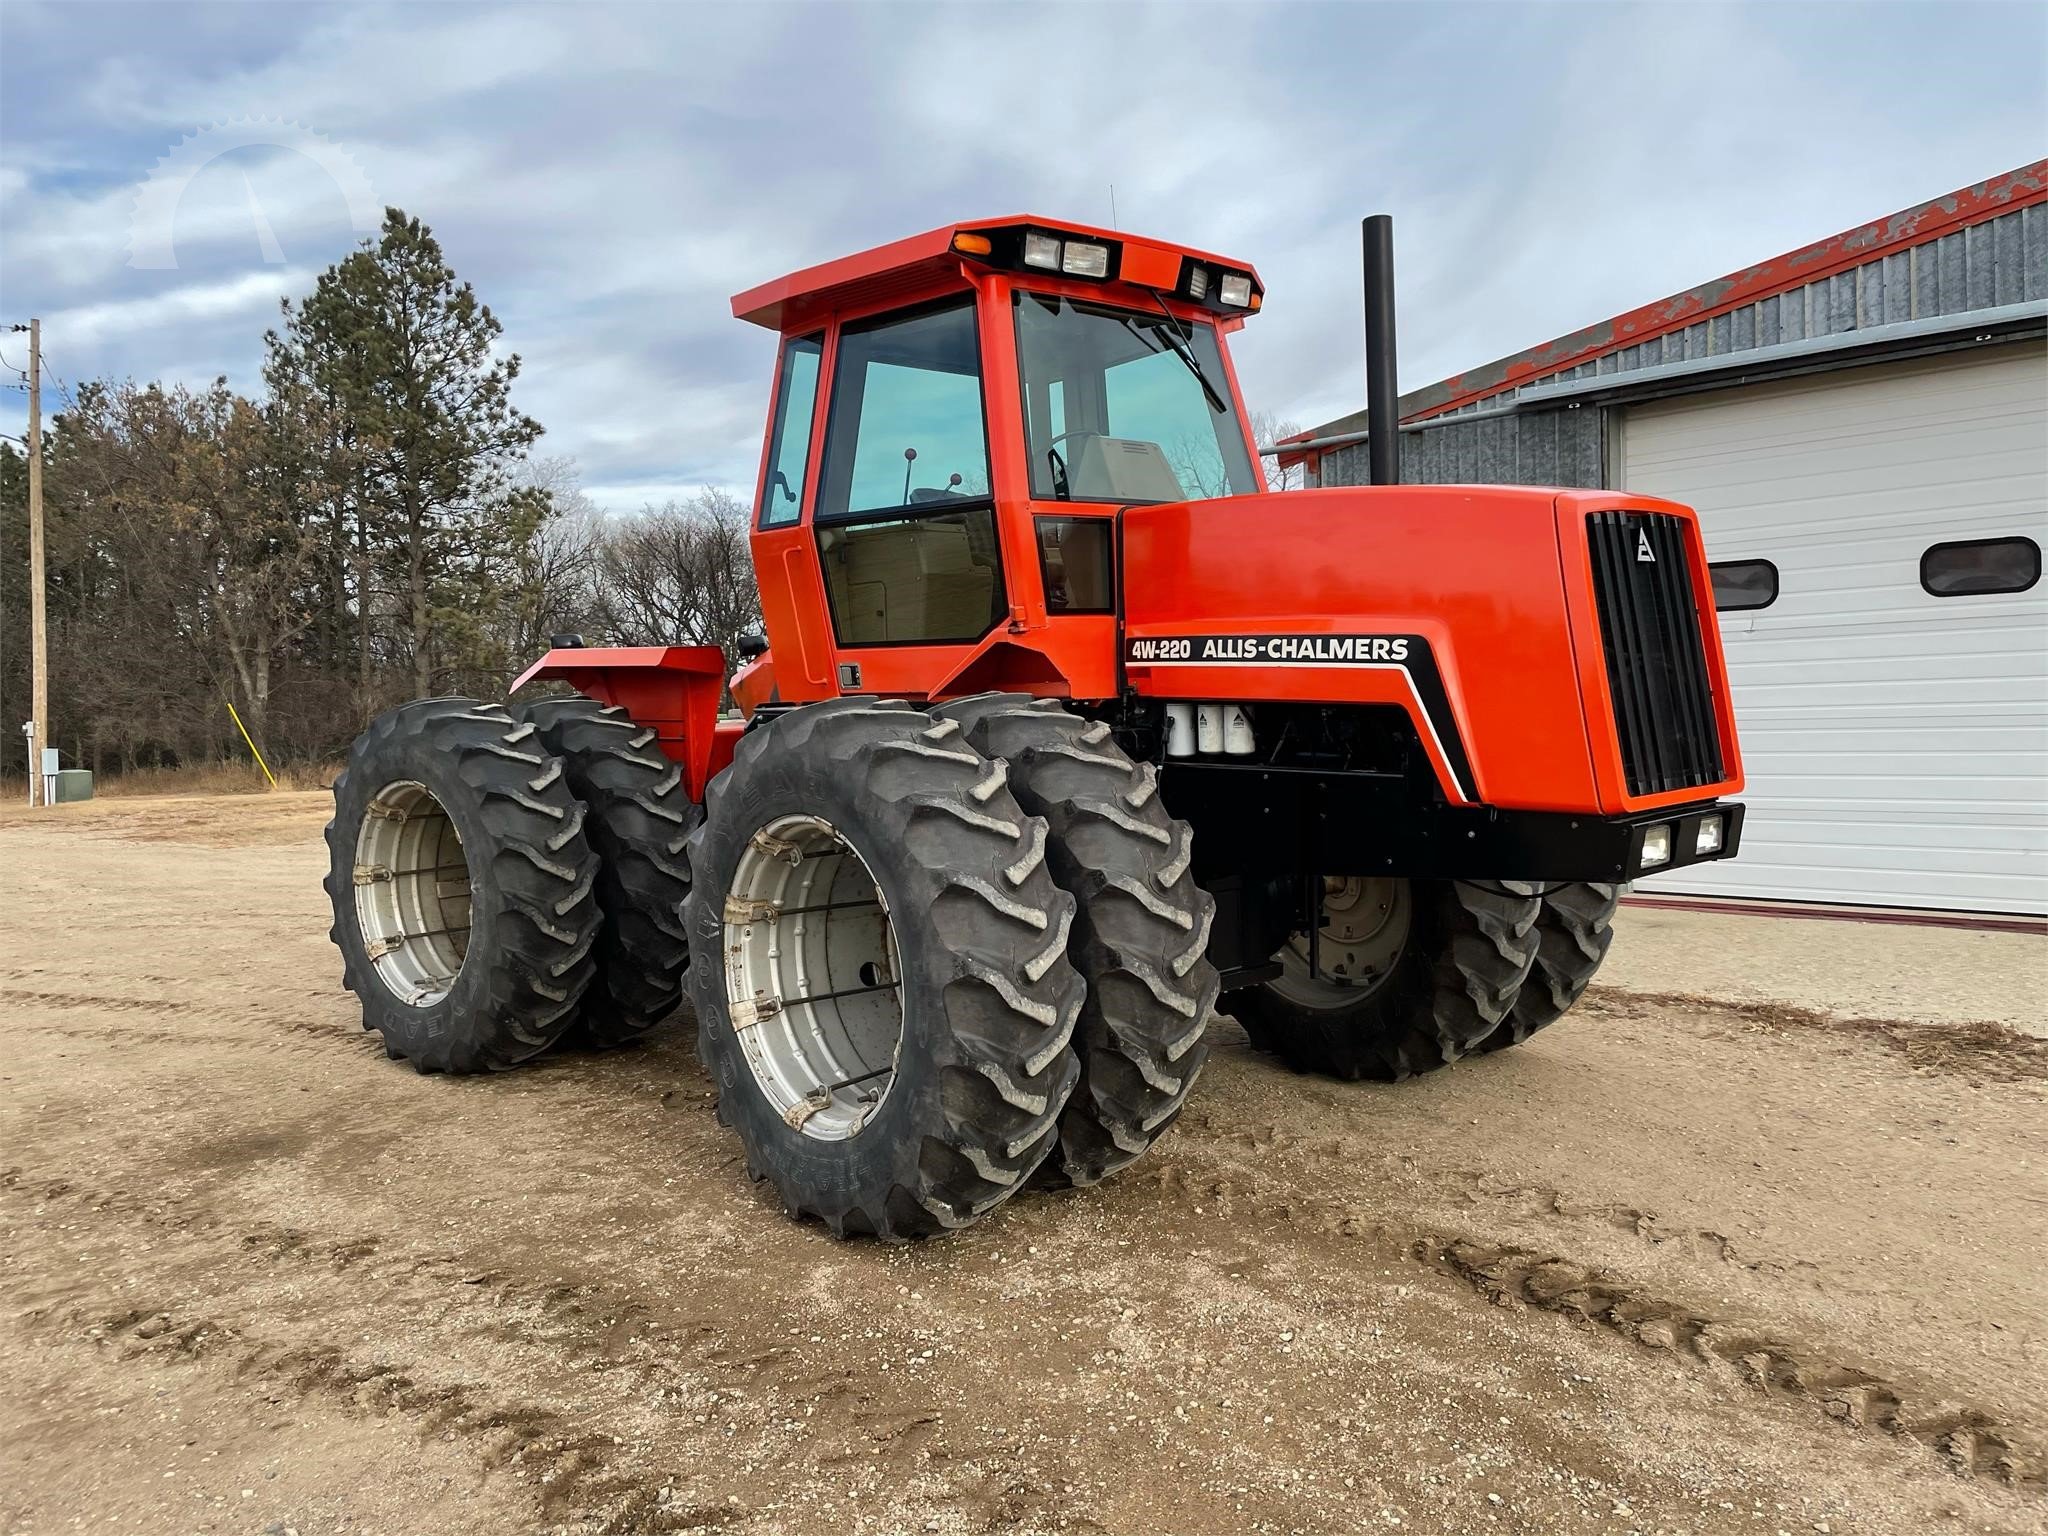 Allis Chalmers 4W 220 Tractor Sold For Record Price Today At Auction's Machinery Talk